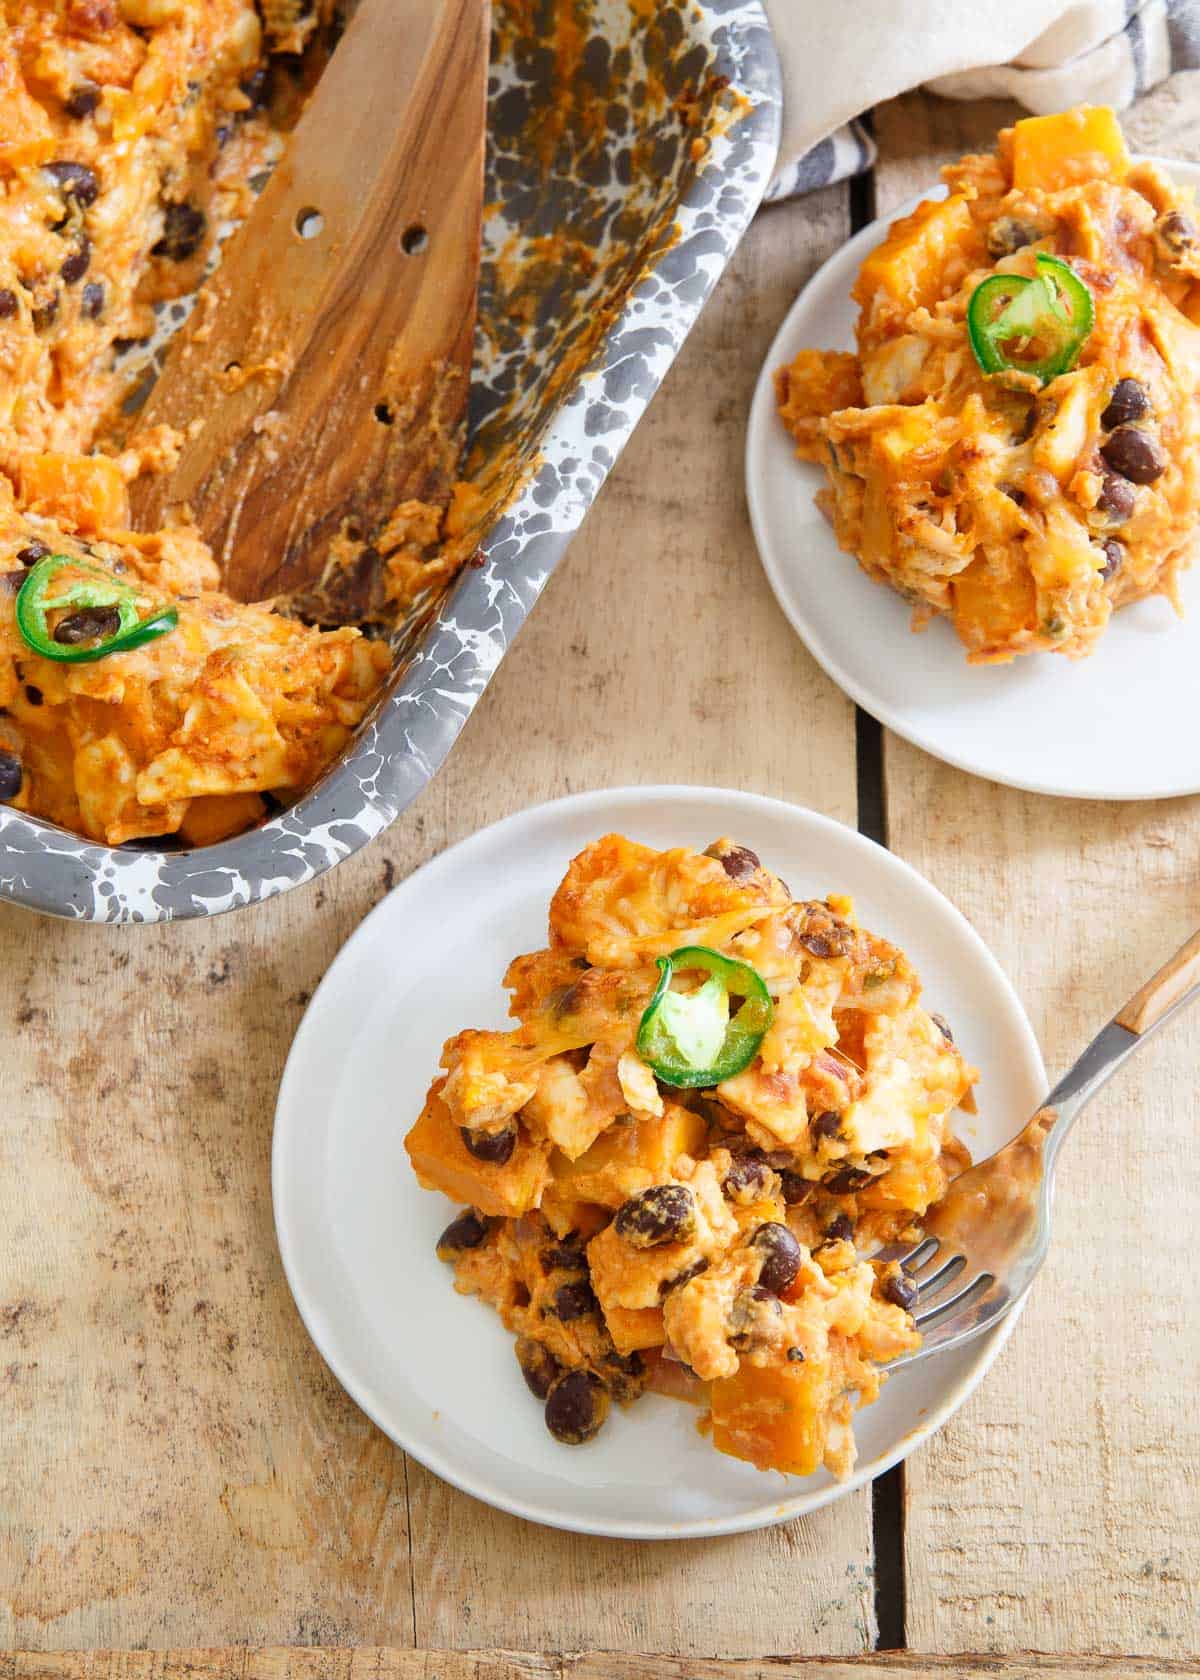 Beaming with fall superfoods, this creamy, cheesy pumpkin tortilla casserole is a great family dinner!